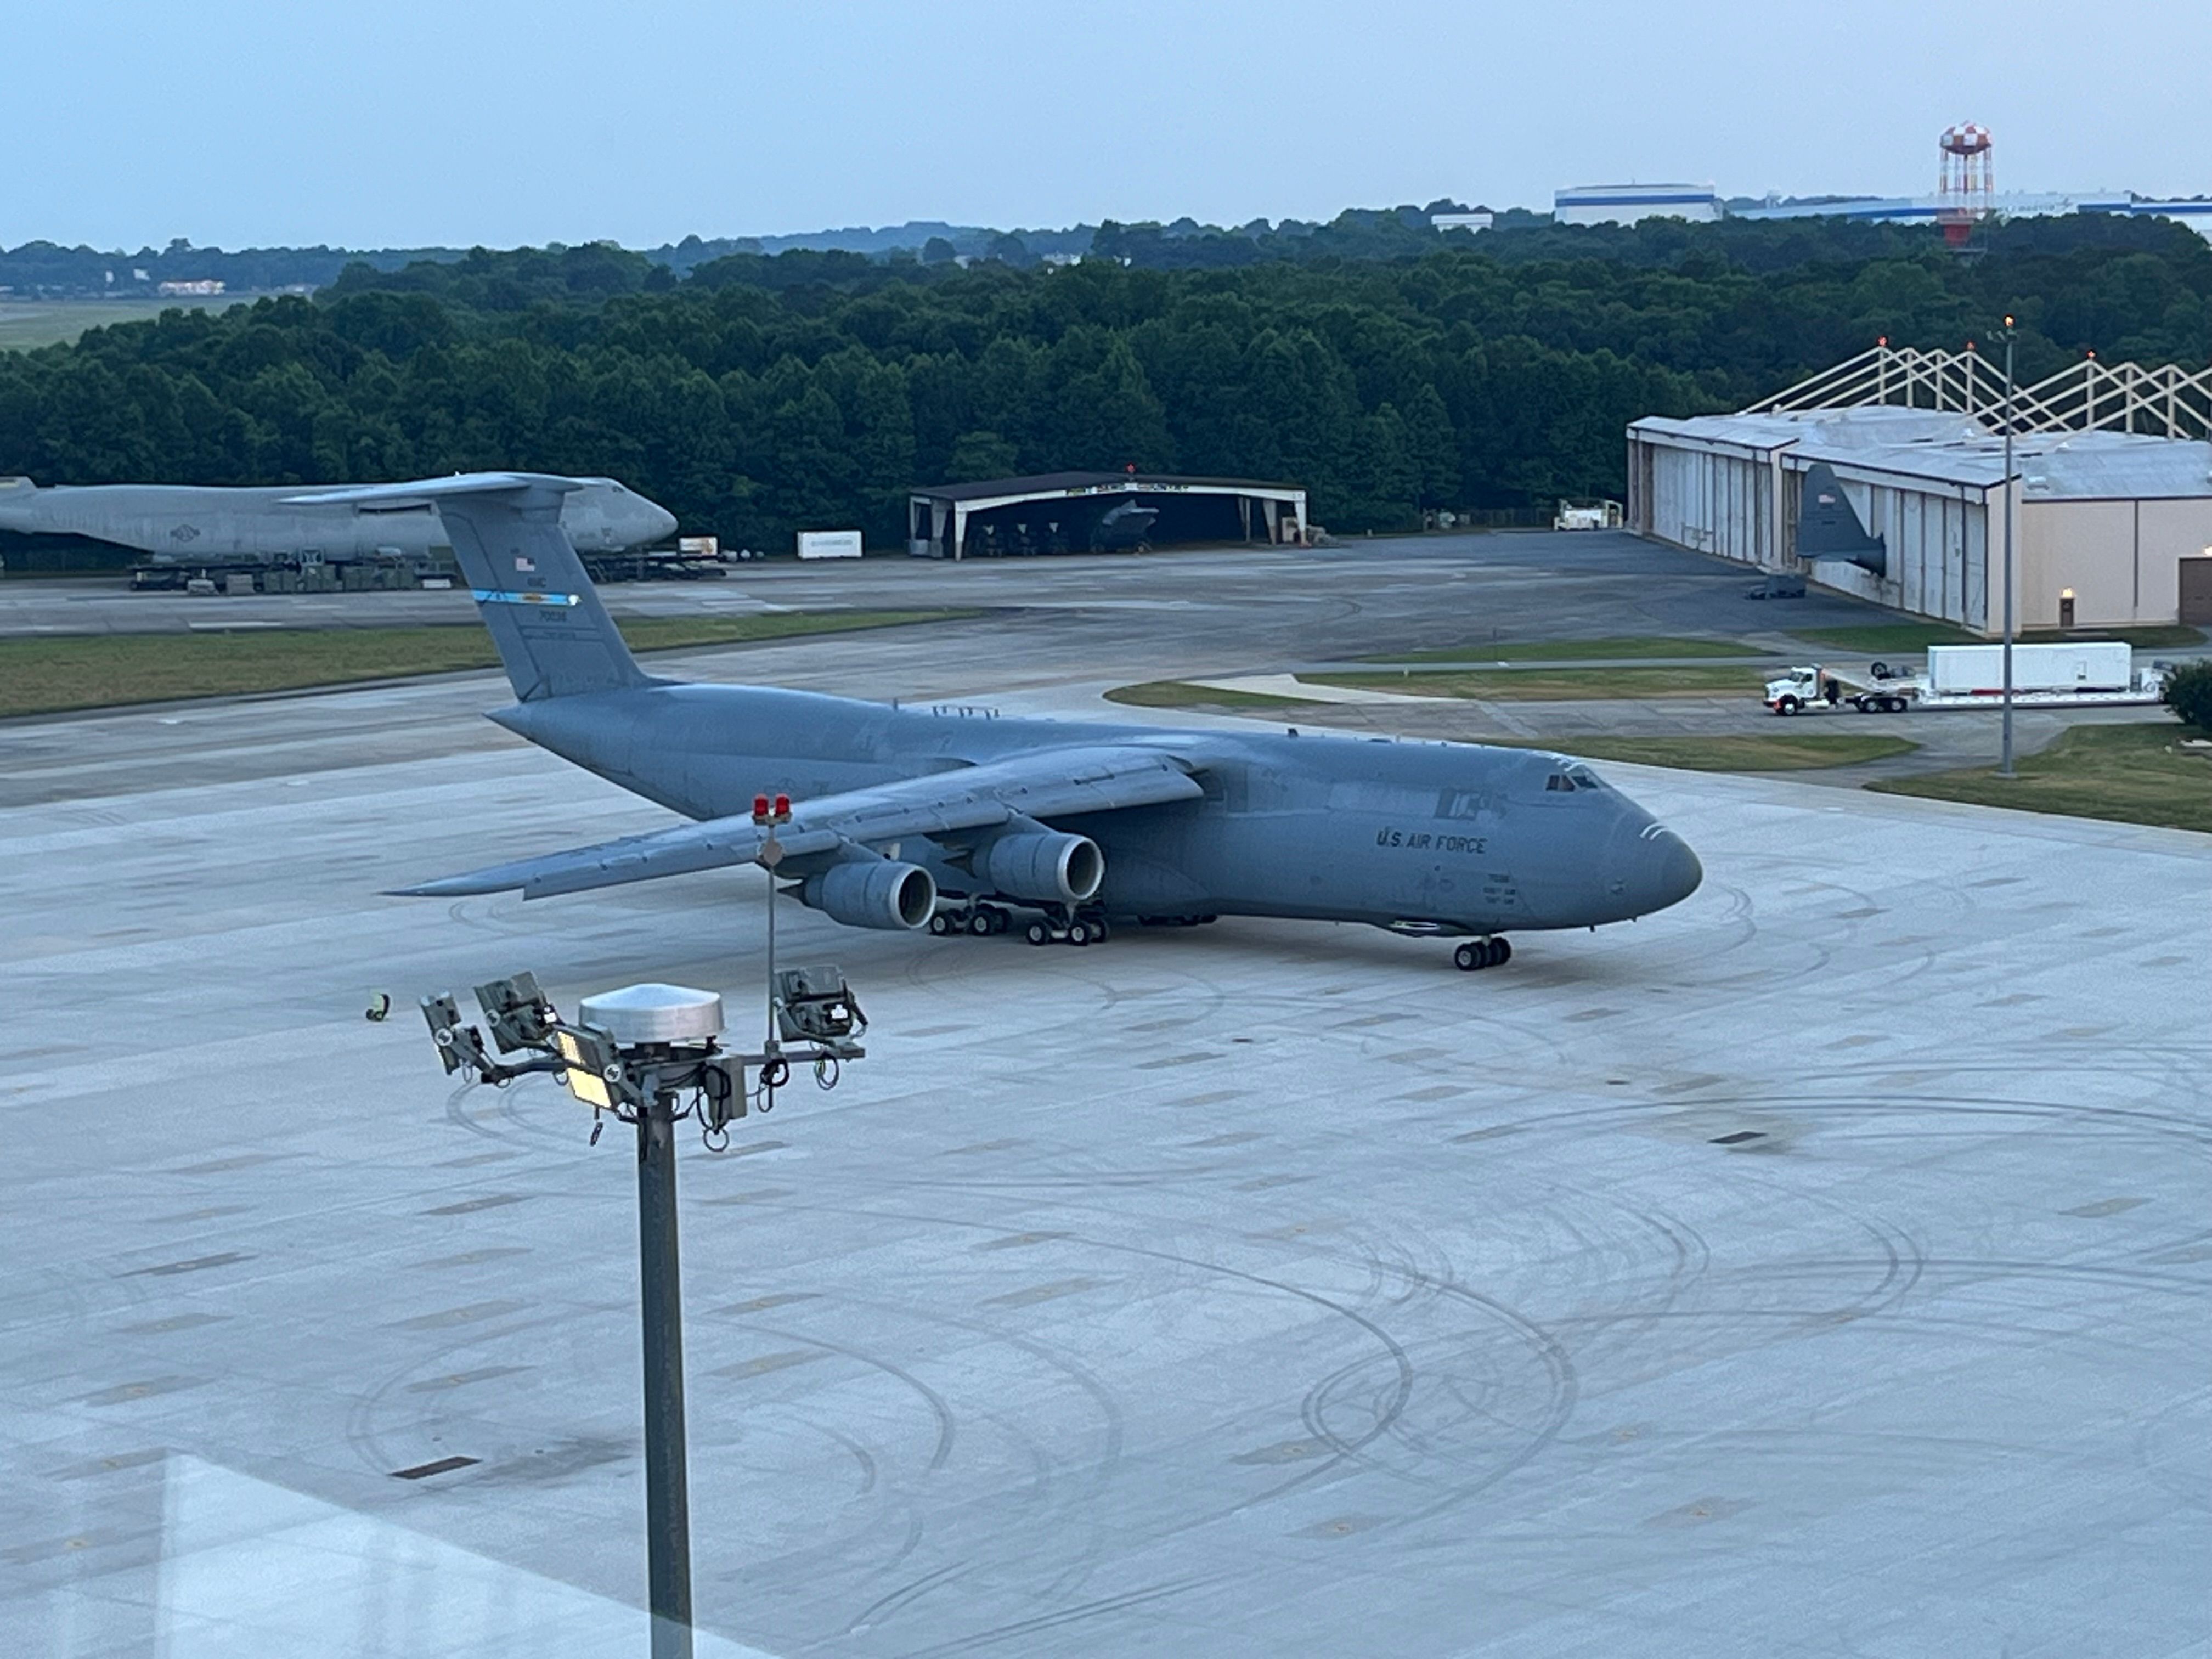 A C-5 at the airport